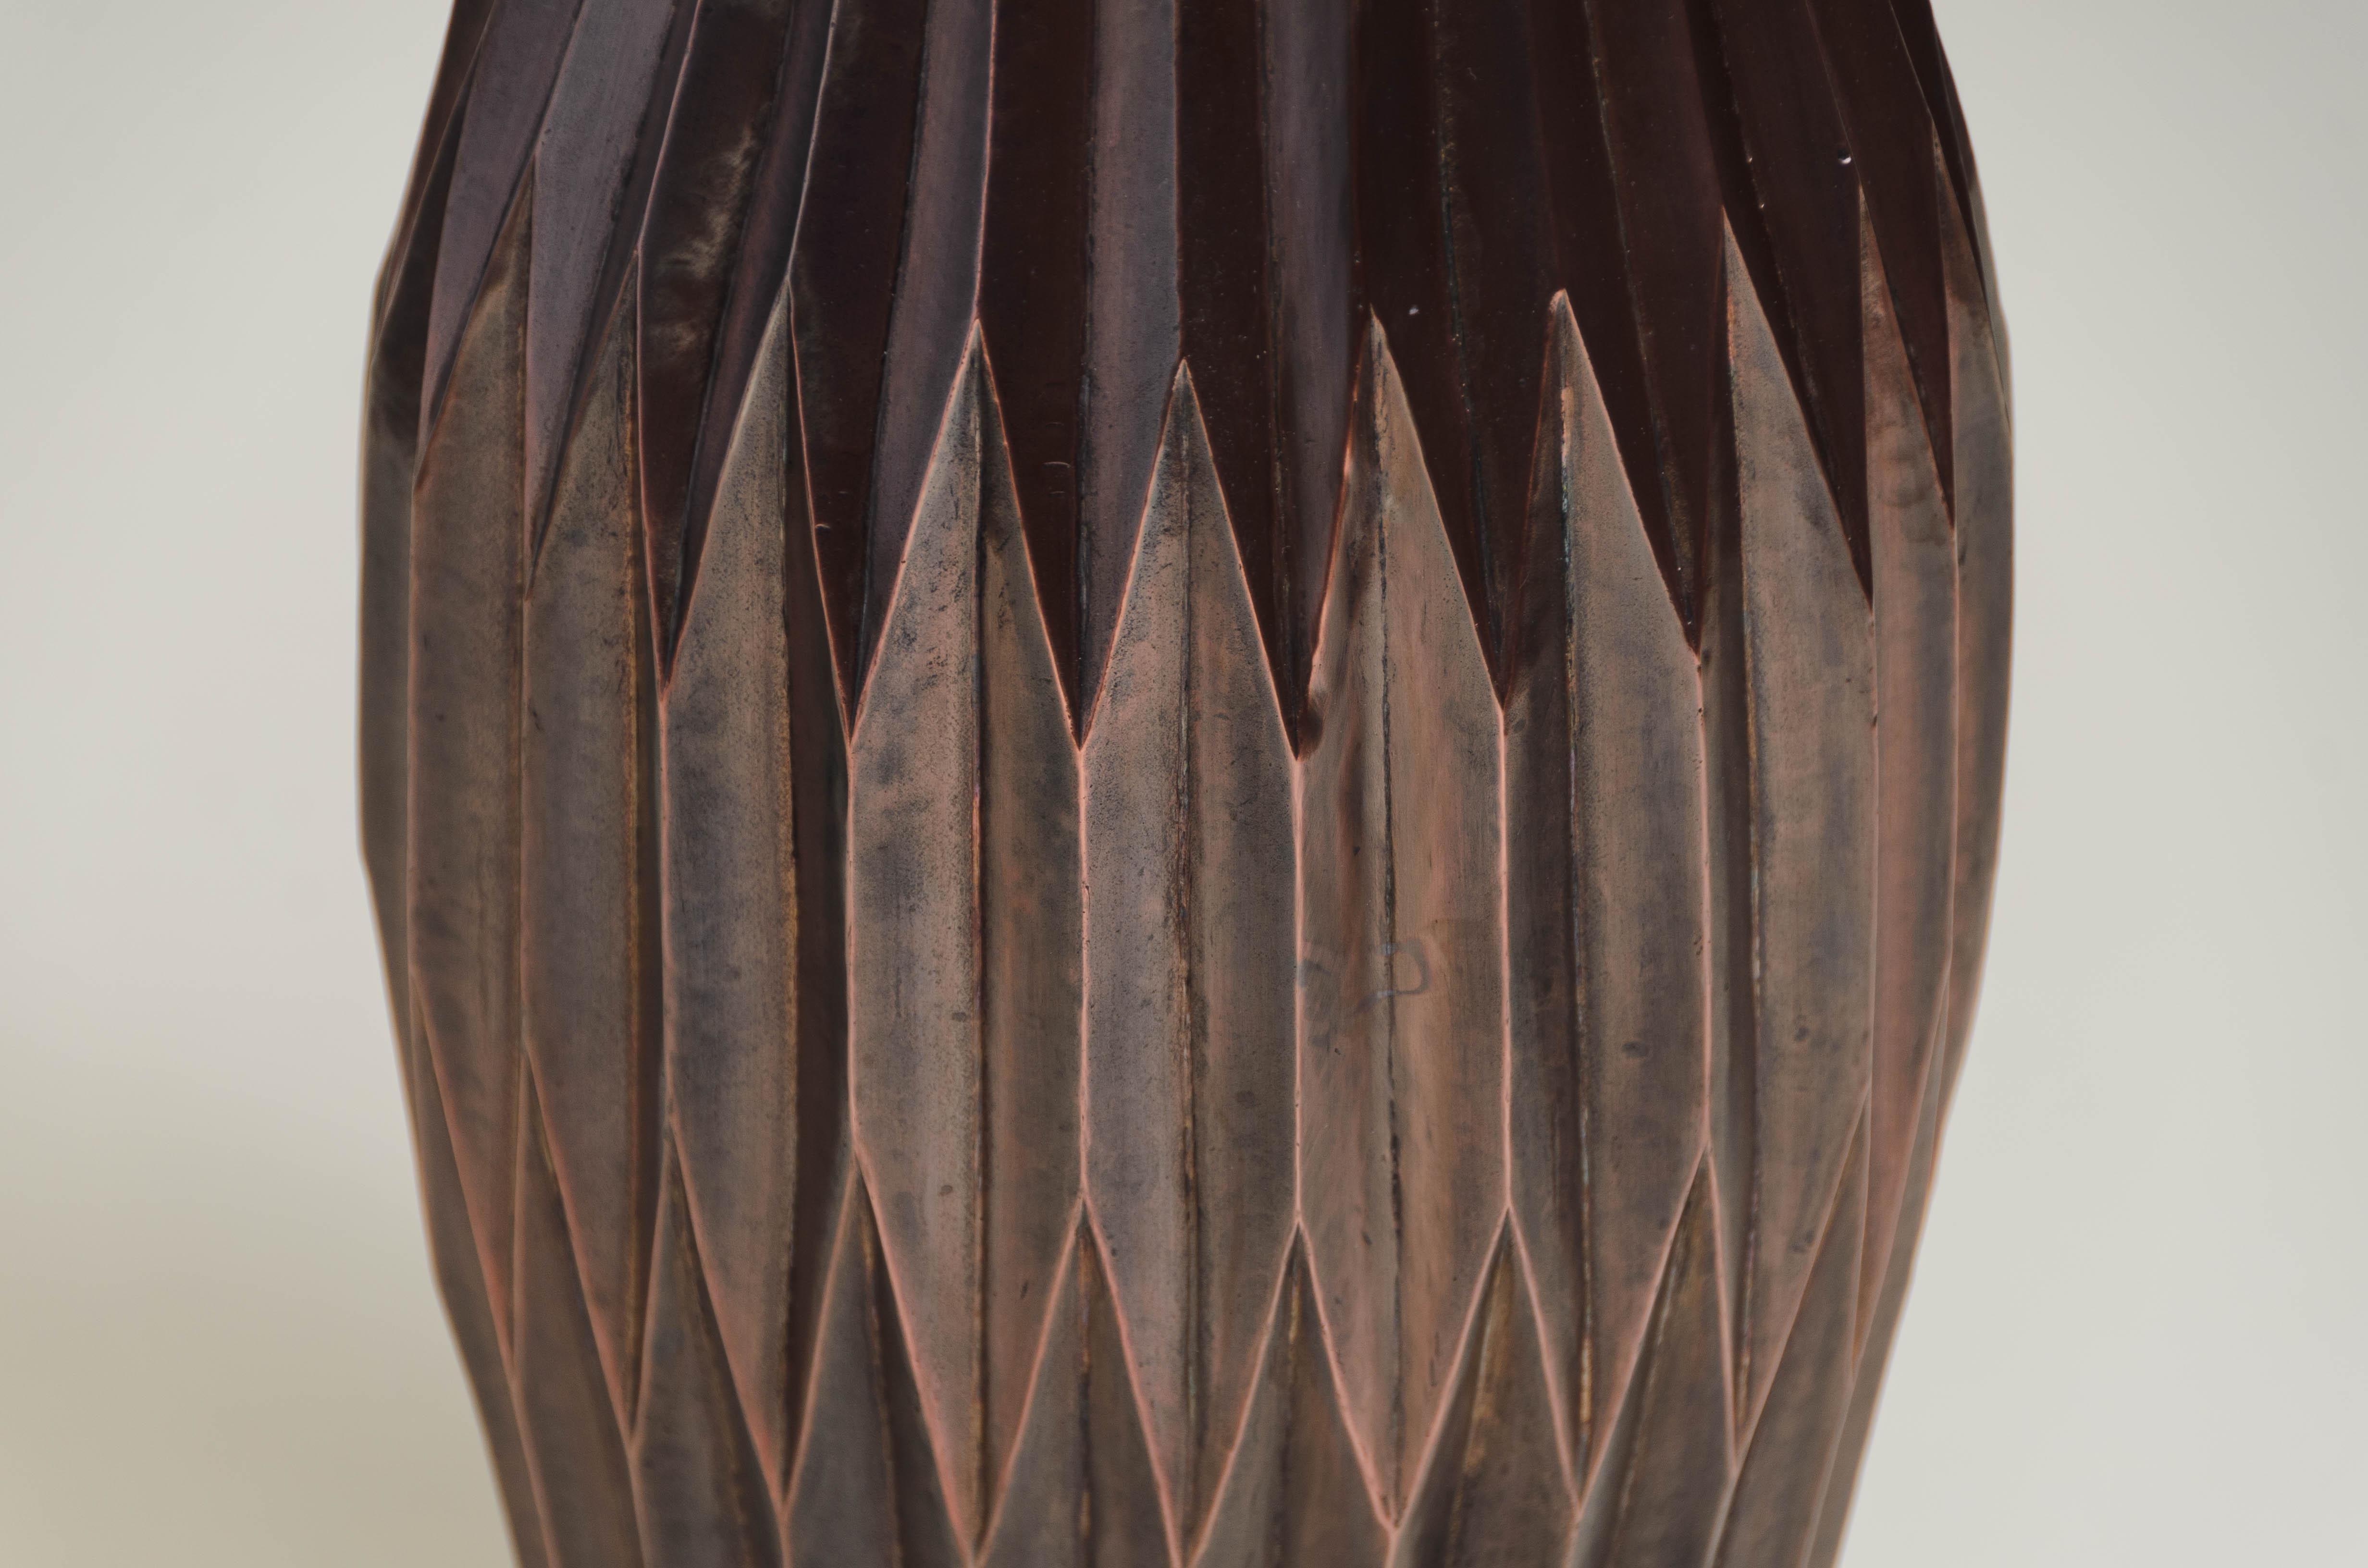 Anodized Contemporary Repoussé Tall Lantern Design Vase in Antique Copper by Robert Kuo For Sale